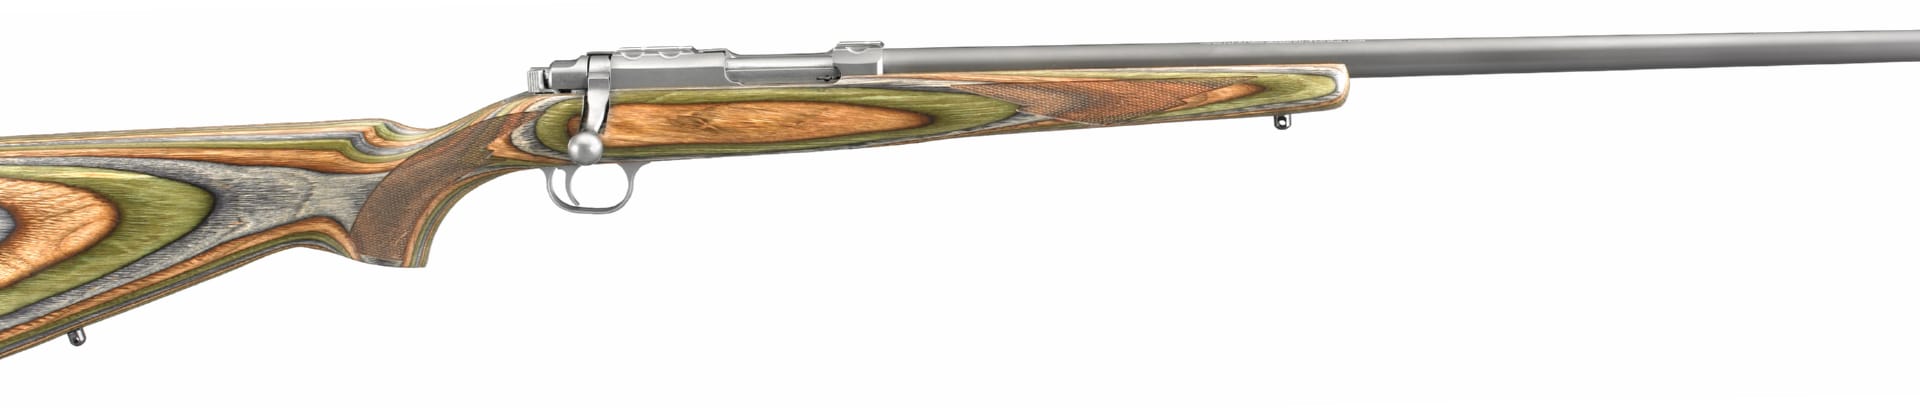 Ruger M77 Rifle wallpapers HD quality